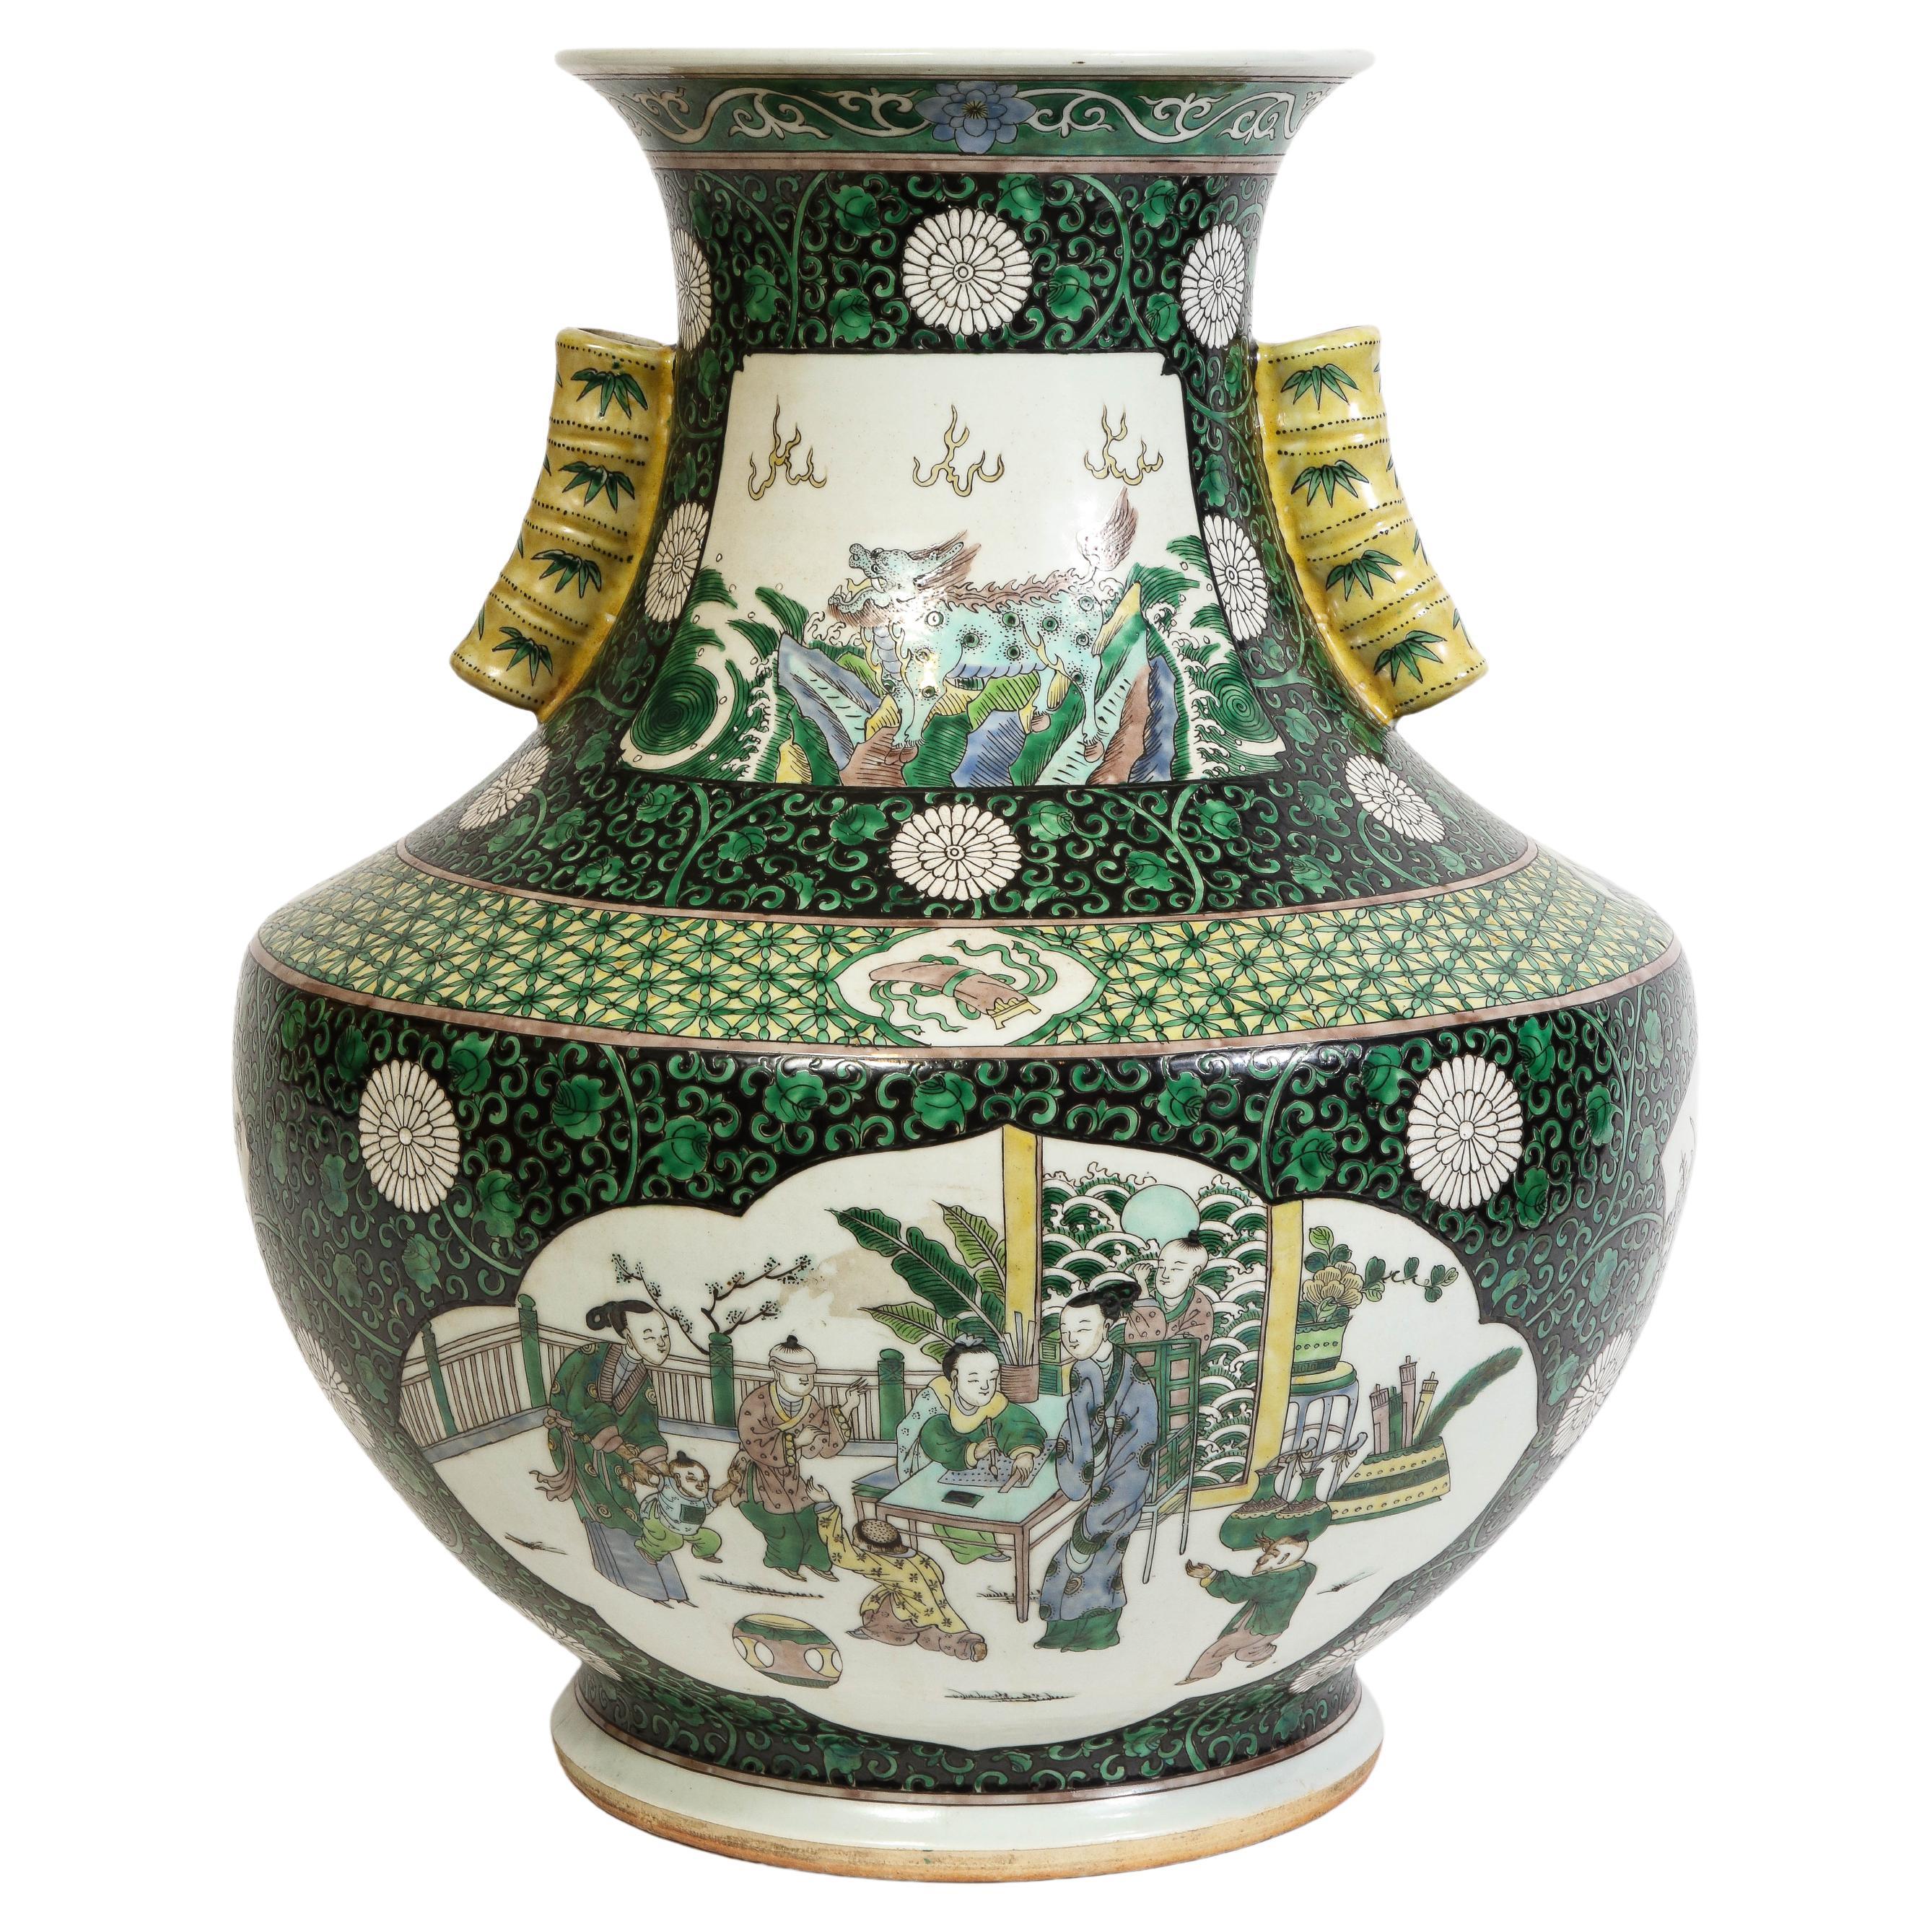 An Unusual Chinese Famille Vert Porcelain Vase with Bamboo Handles